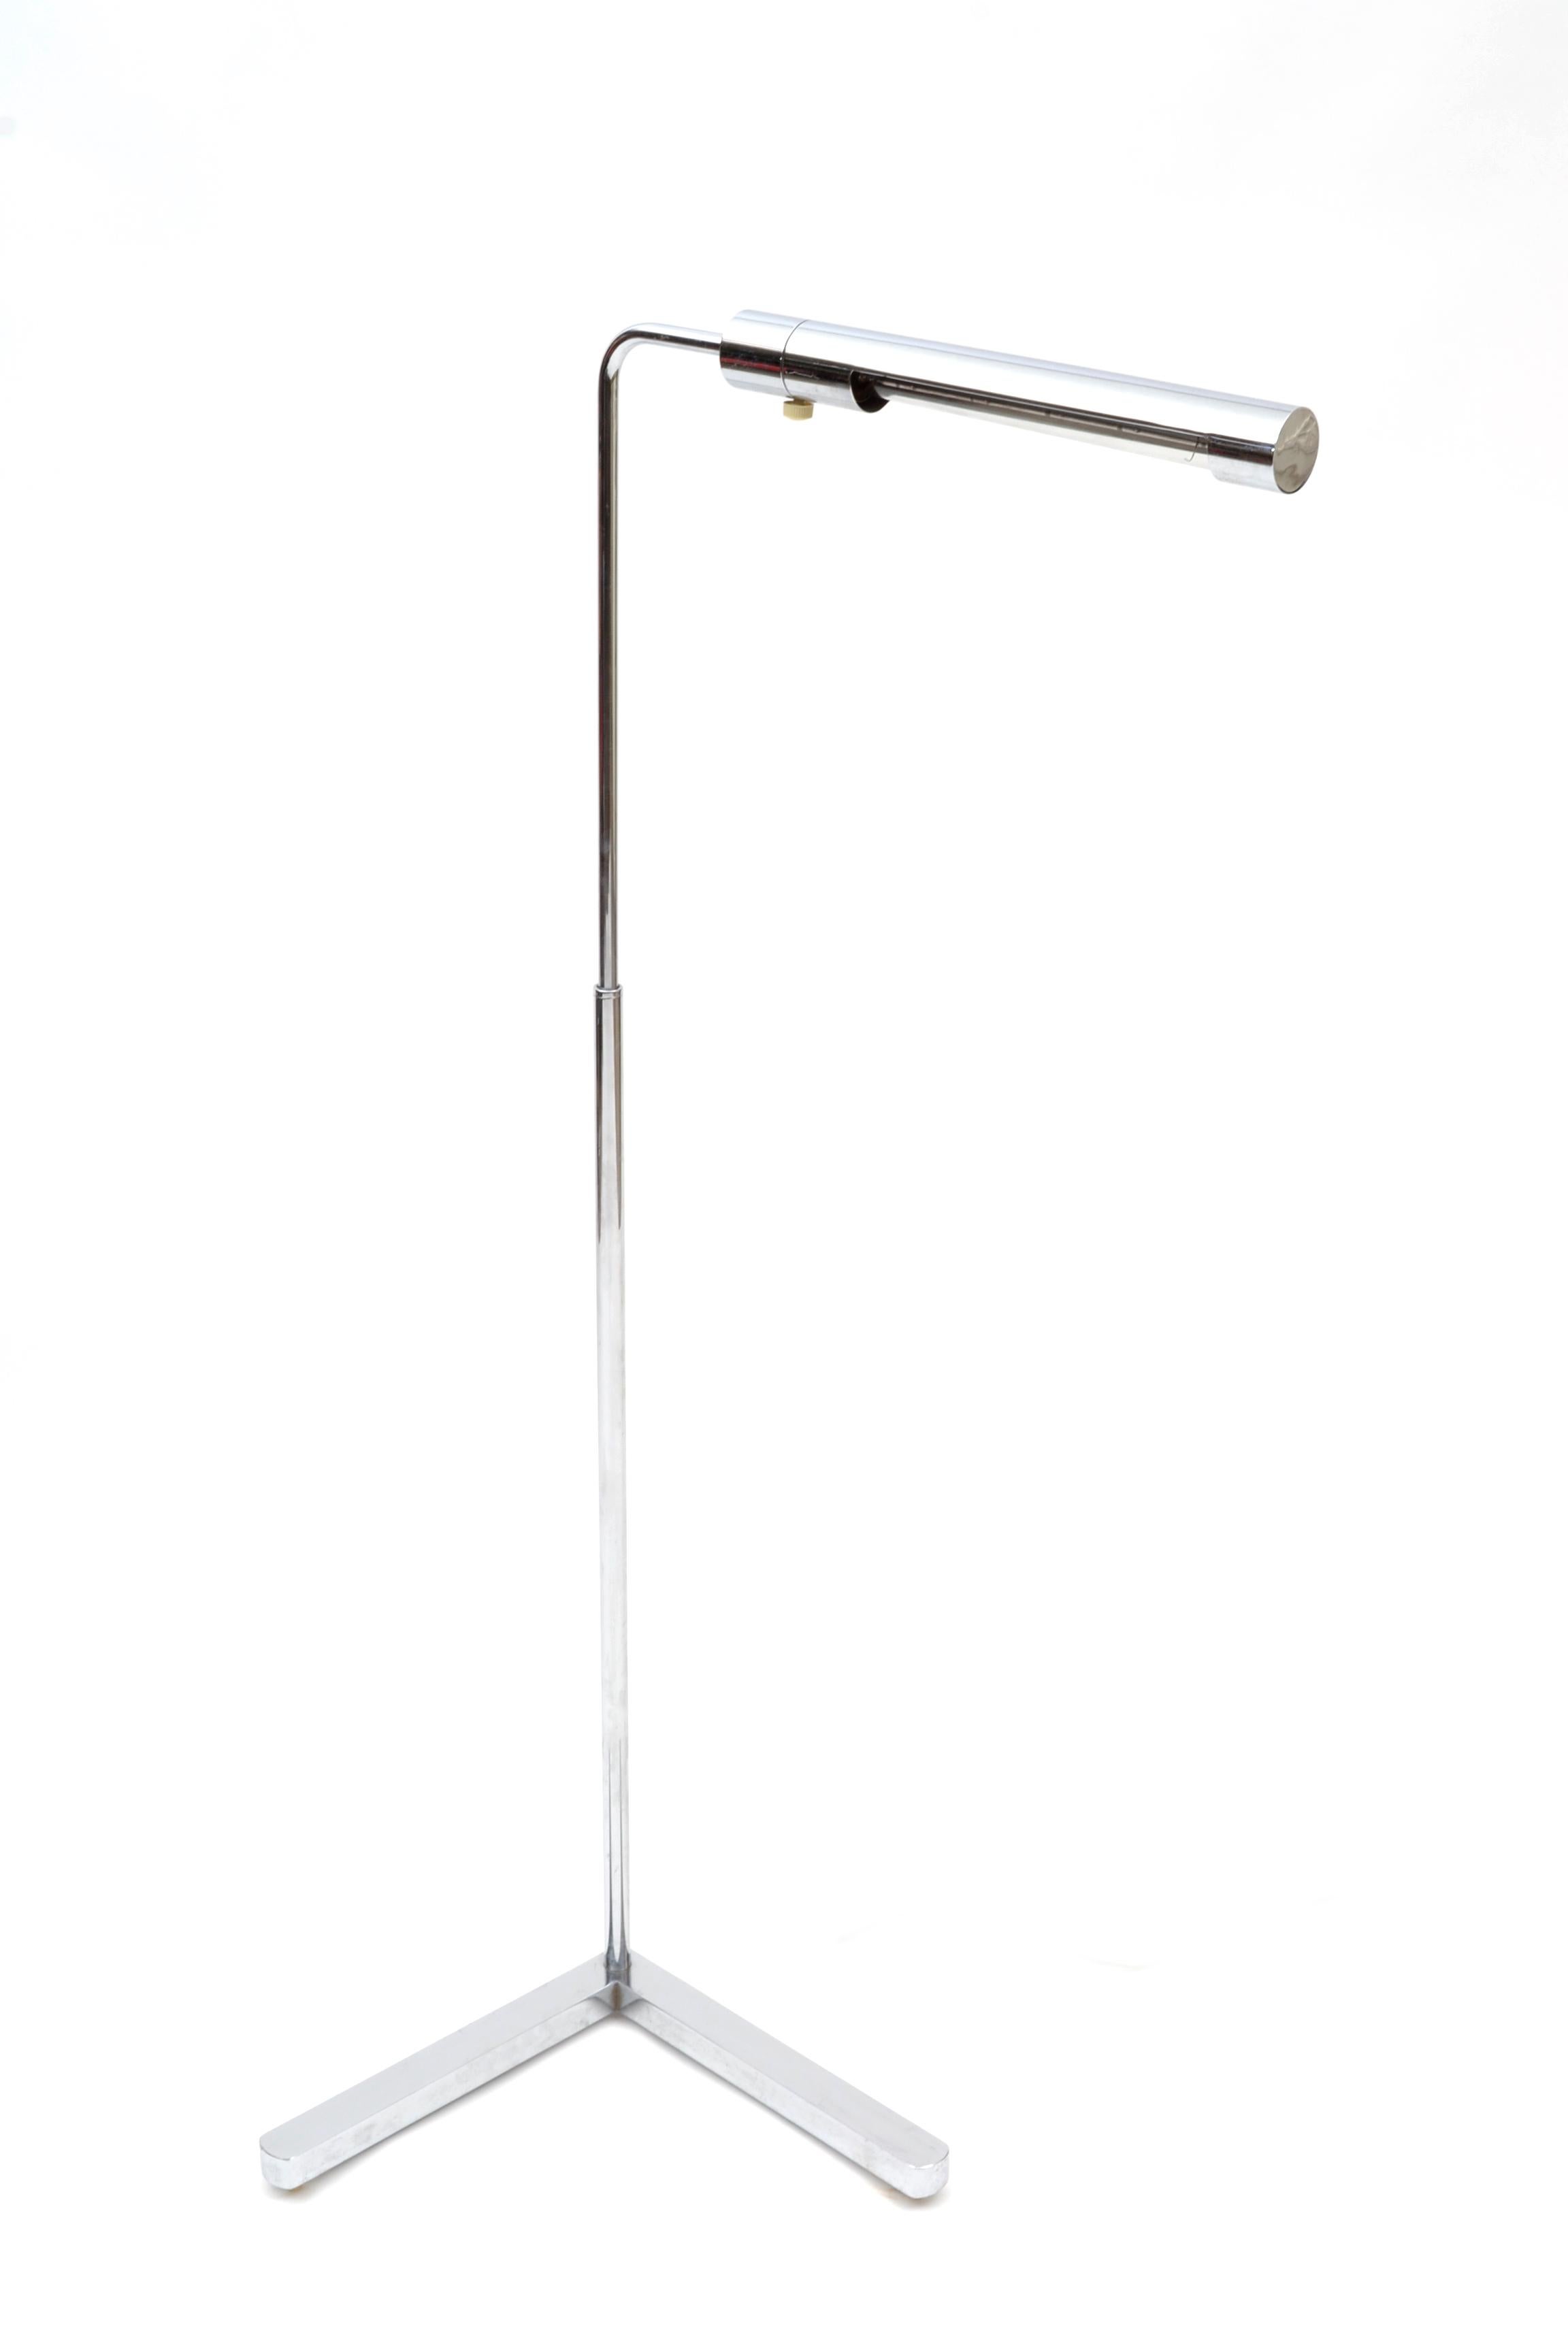 Chrome-plated Casella lamp with adjustable height, light fixture and dimmable knob to allow for a variety of lighting options.